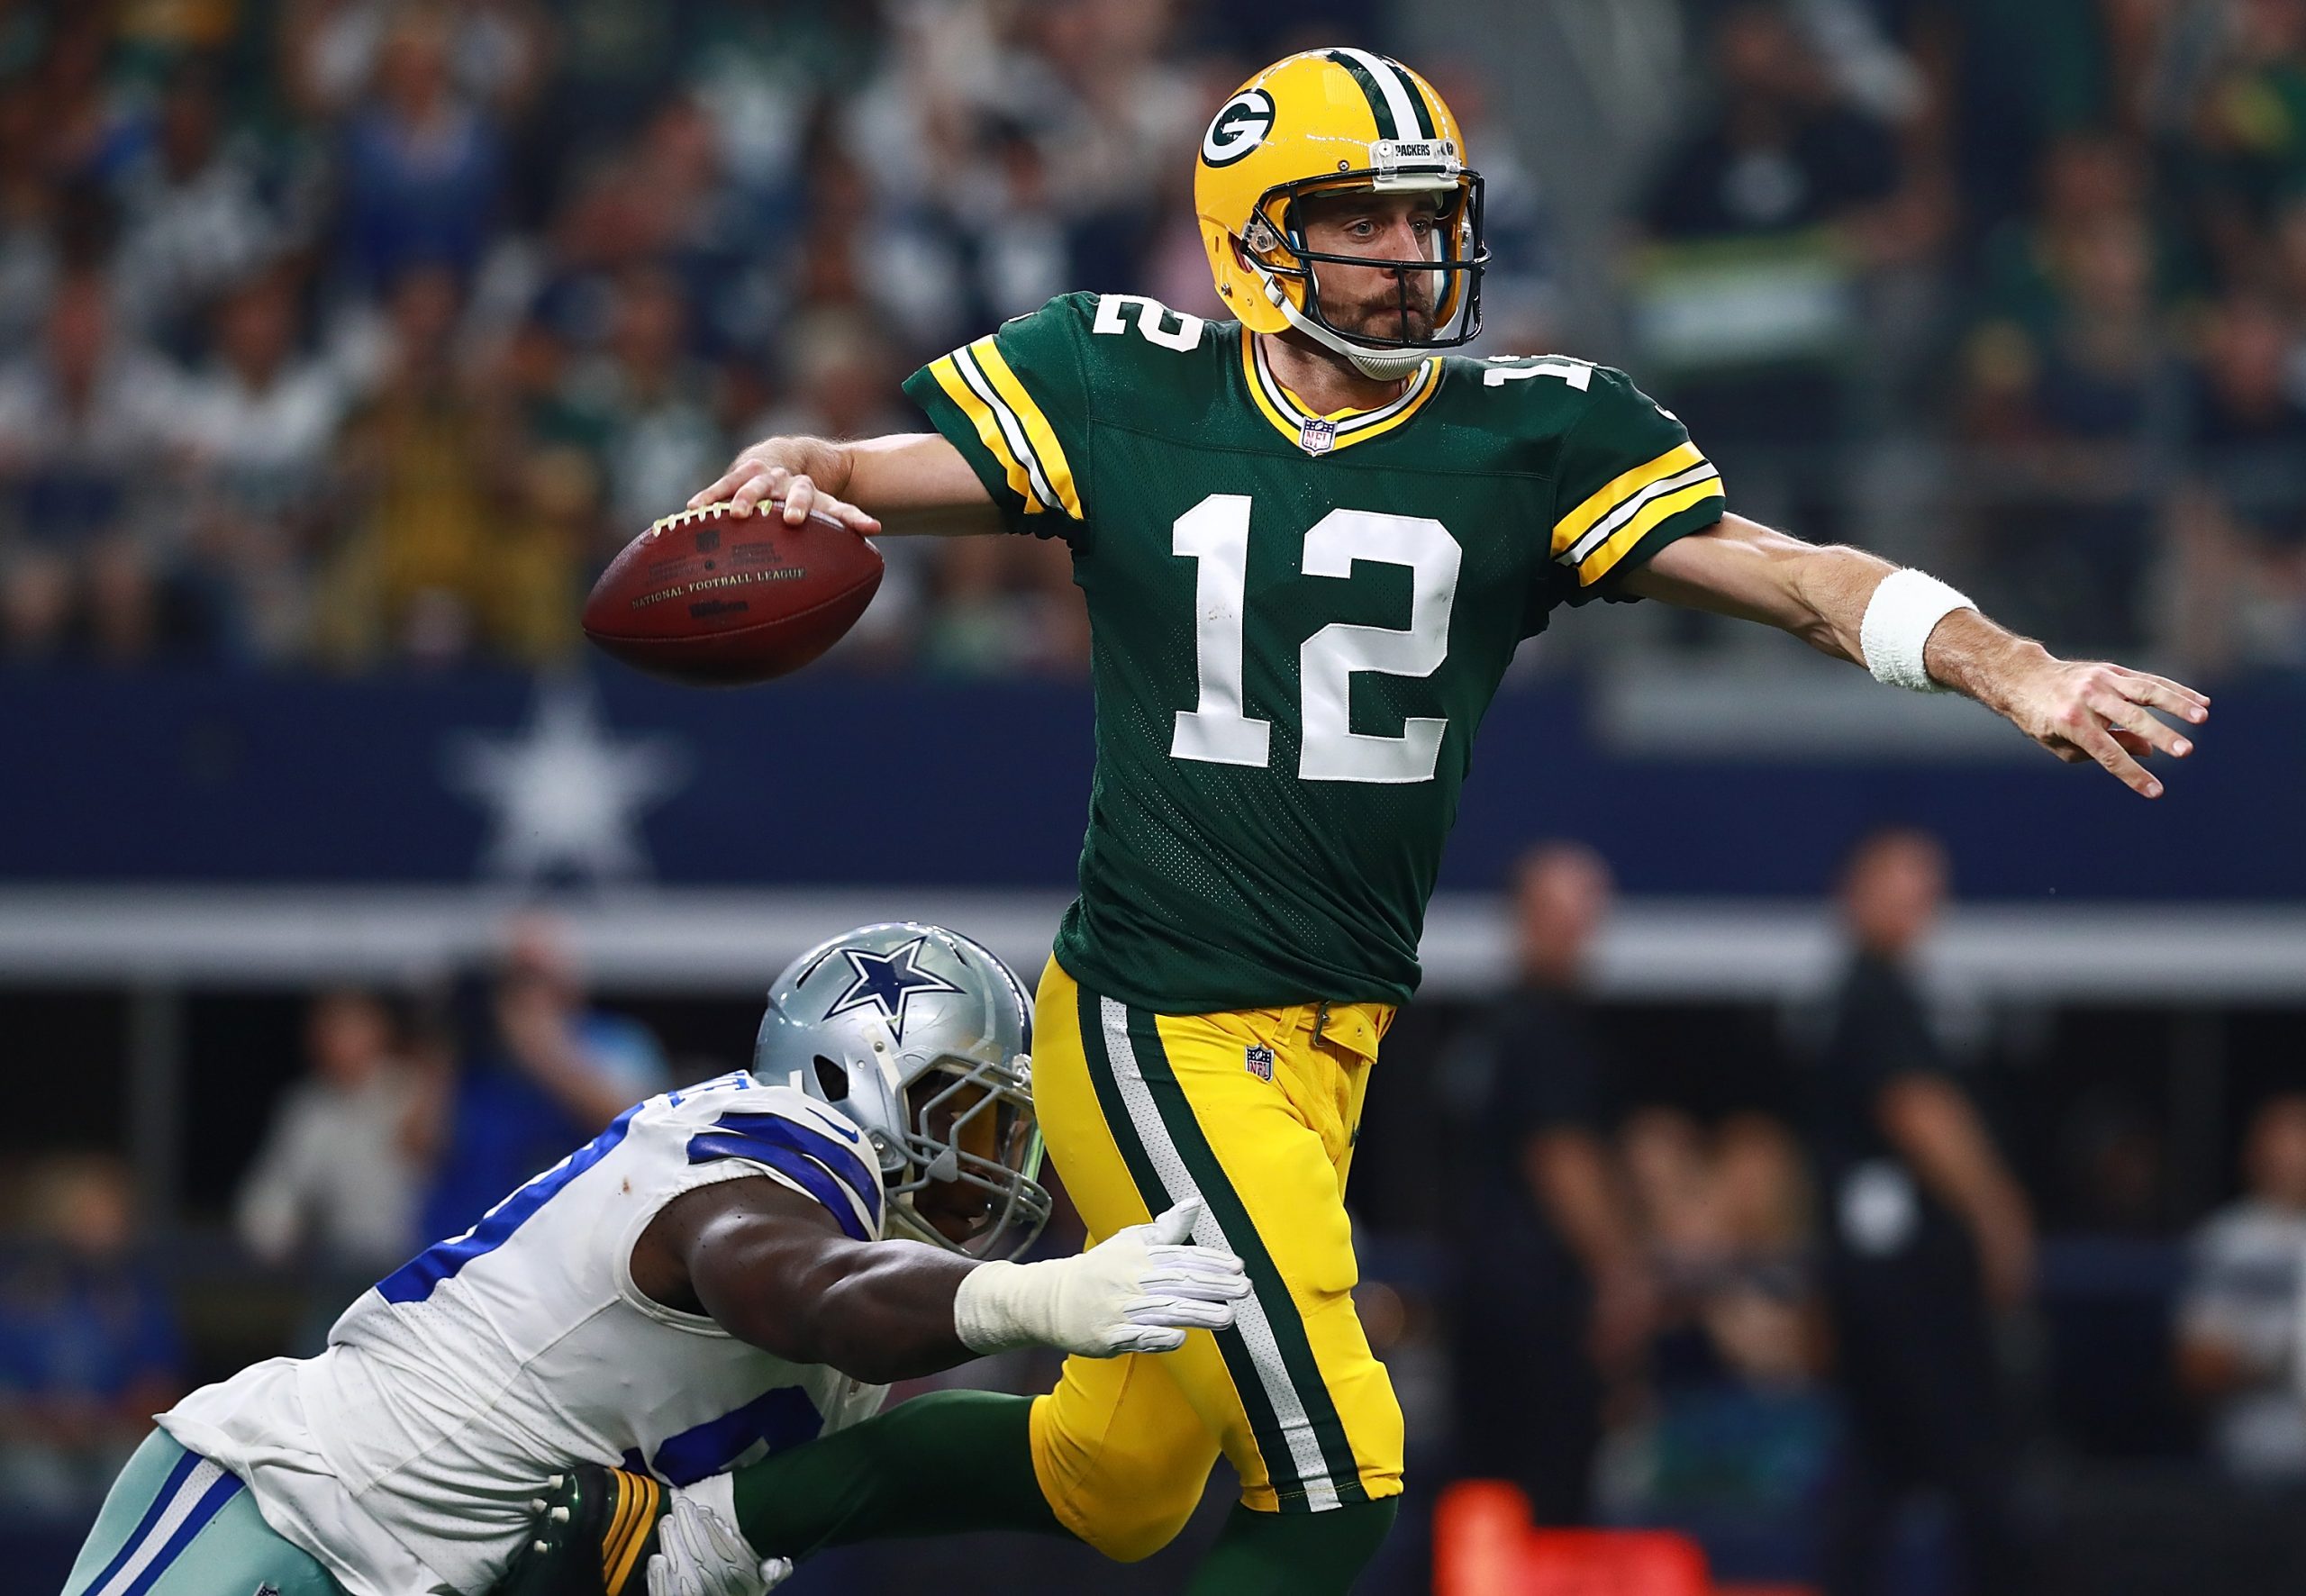 Aaron Rodgers avoids a sck against the Dallas Cowboys.